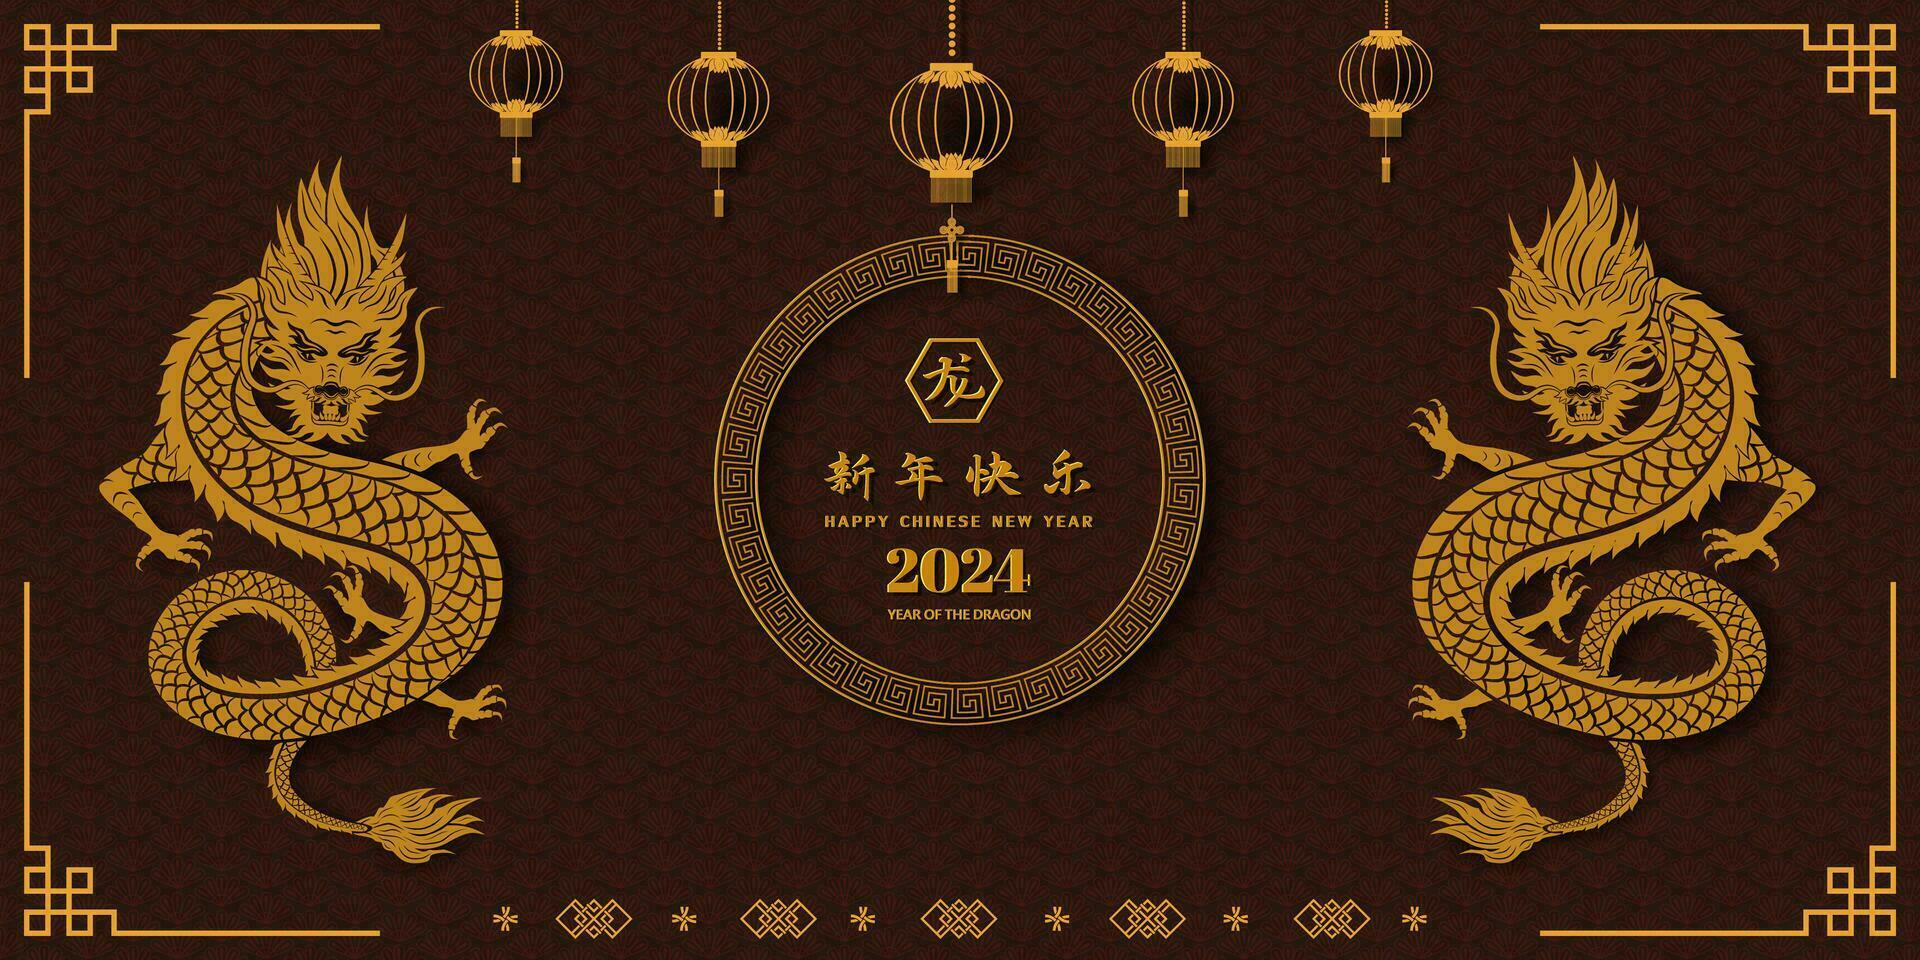 Happy Chinese New Year 2024,dragon zodiac sign with gold paper cut and craft style,Chinese translate mean happy new year 2024,year of the dragon vector